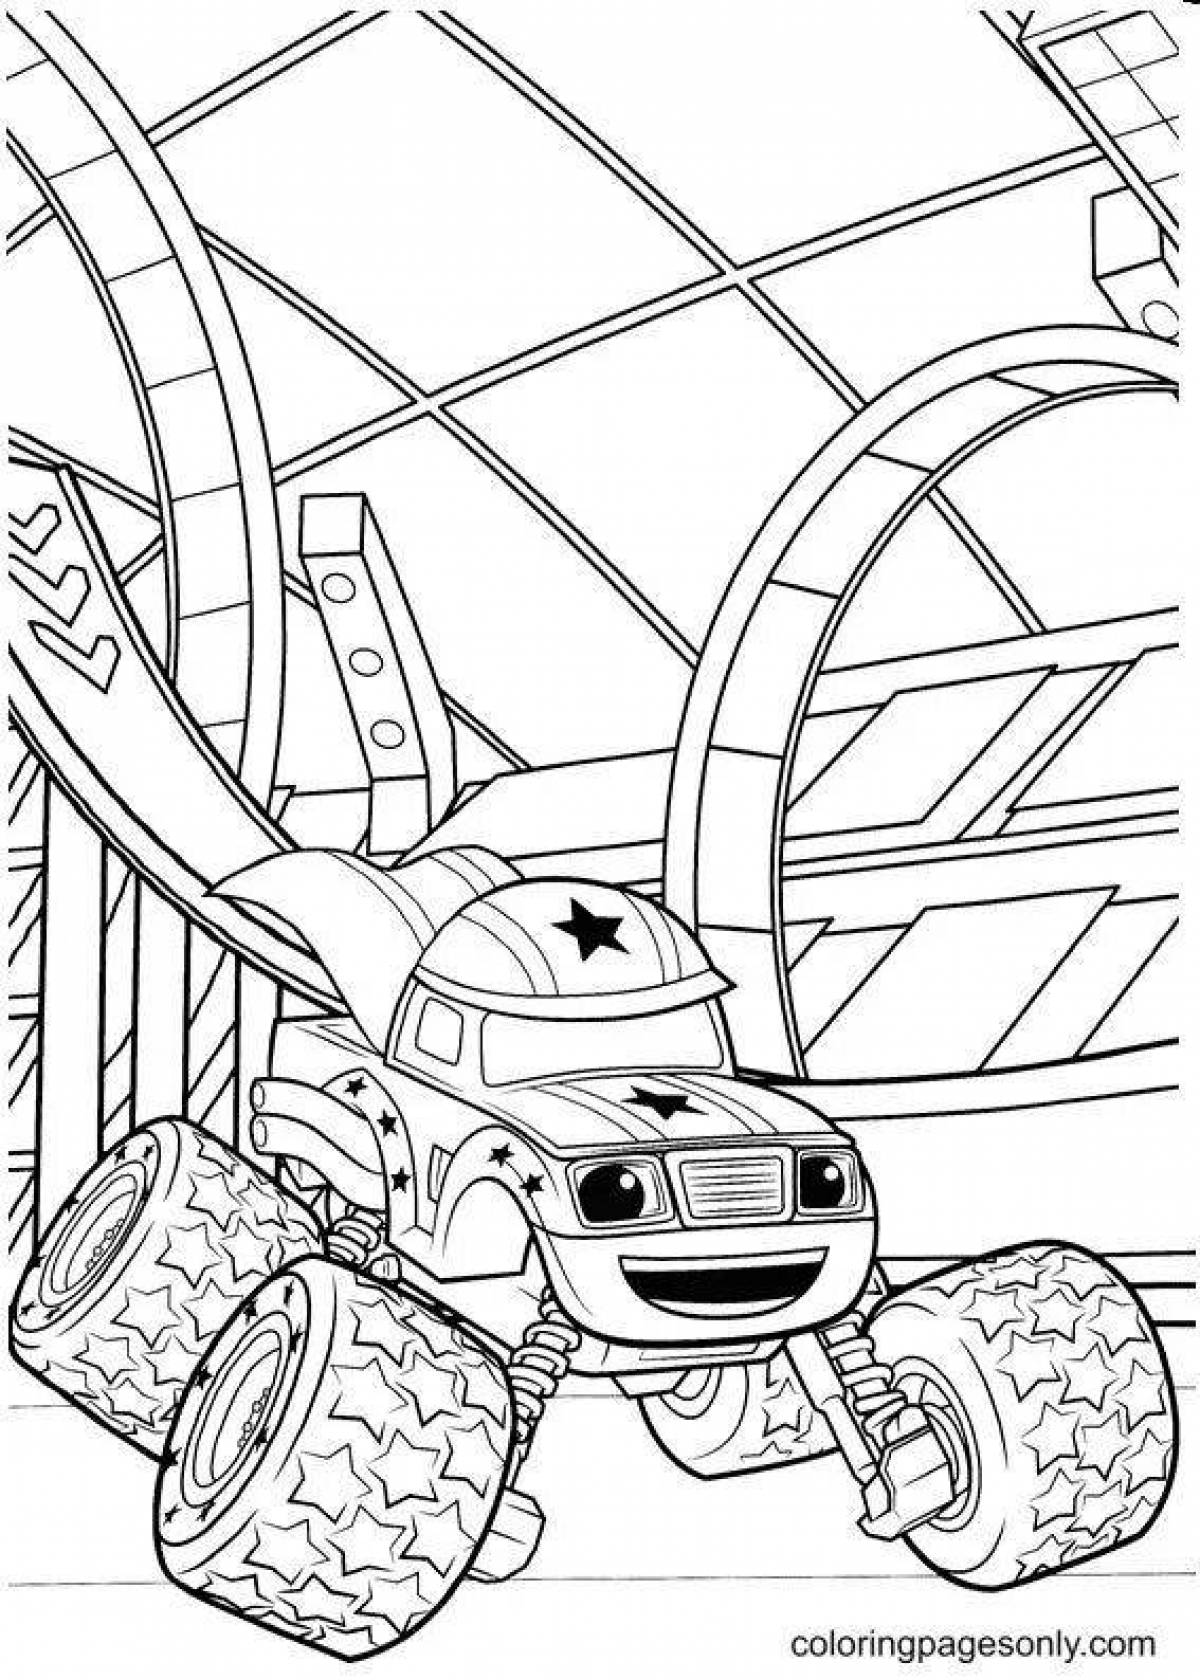 Daredevil coloring page - glorious